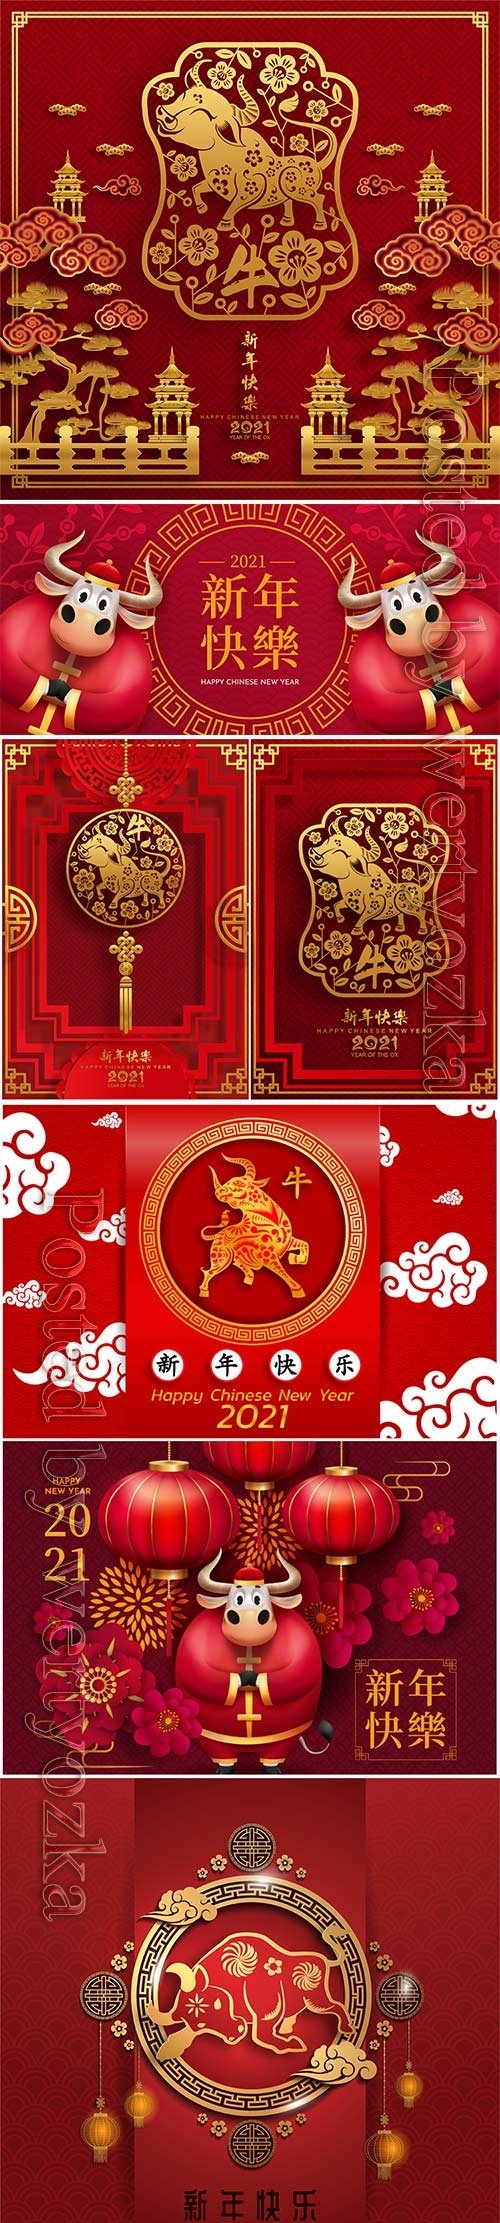 Download Happy chinese new year 2021 vector | DesireFX.COM